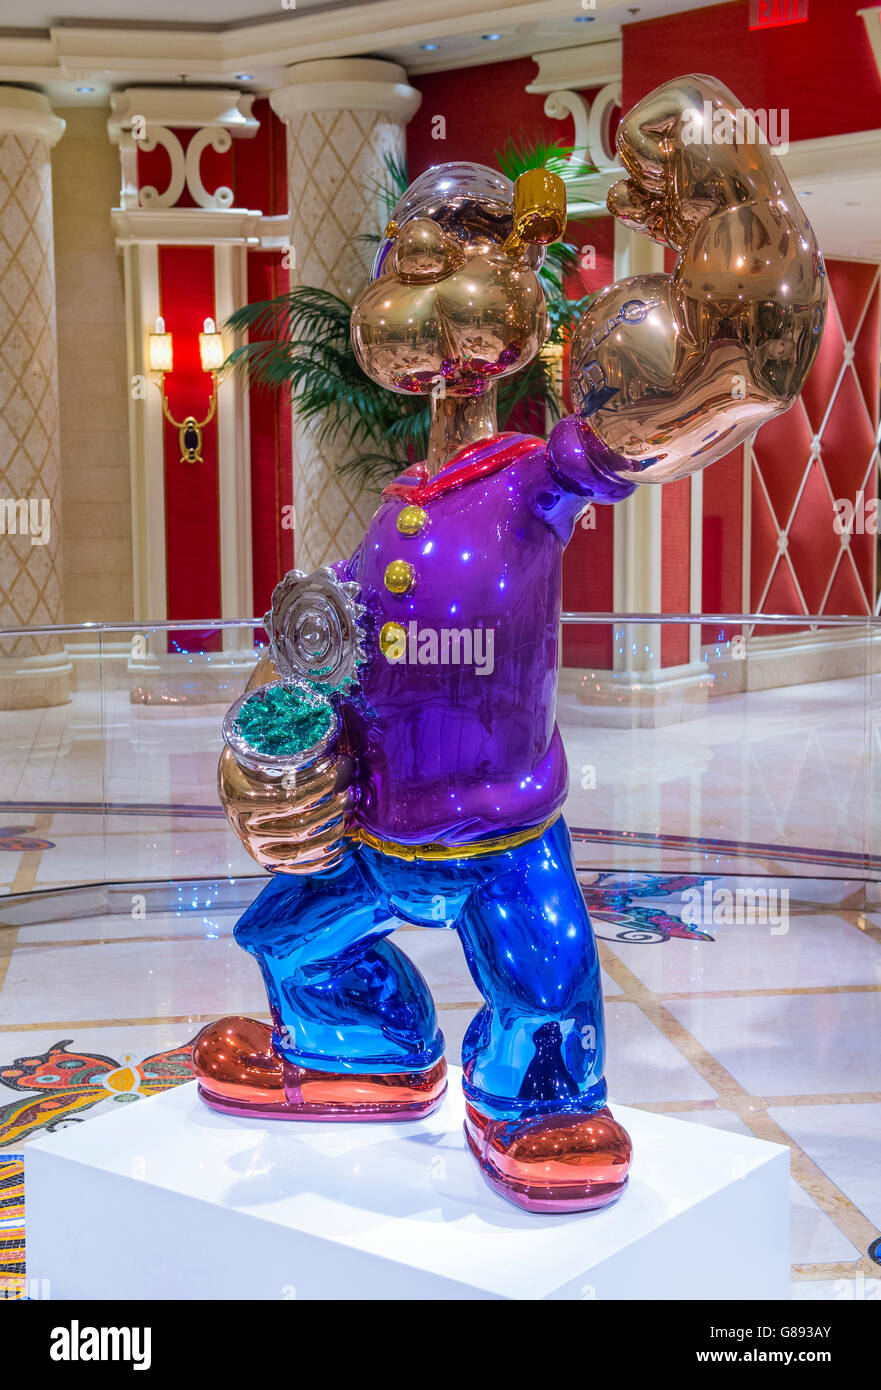 The Jeff Koons Popeye Sculpture display at the Wynn Hotel in Las Vegas  Stock Photo - Alamy